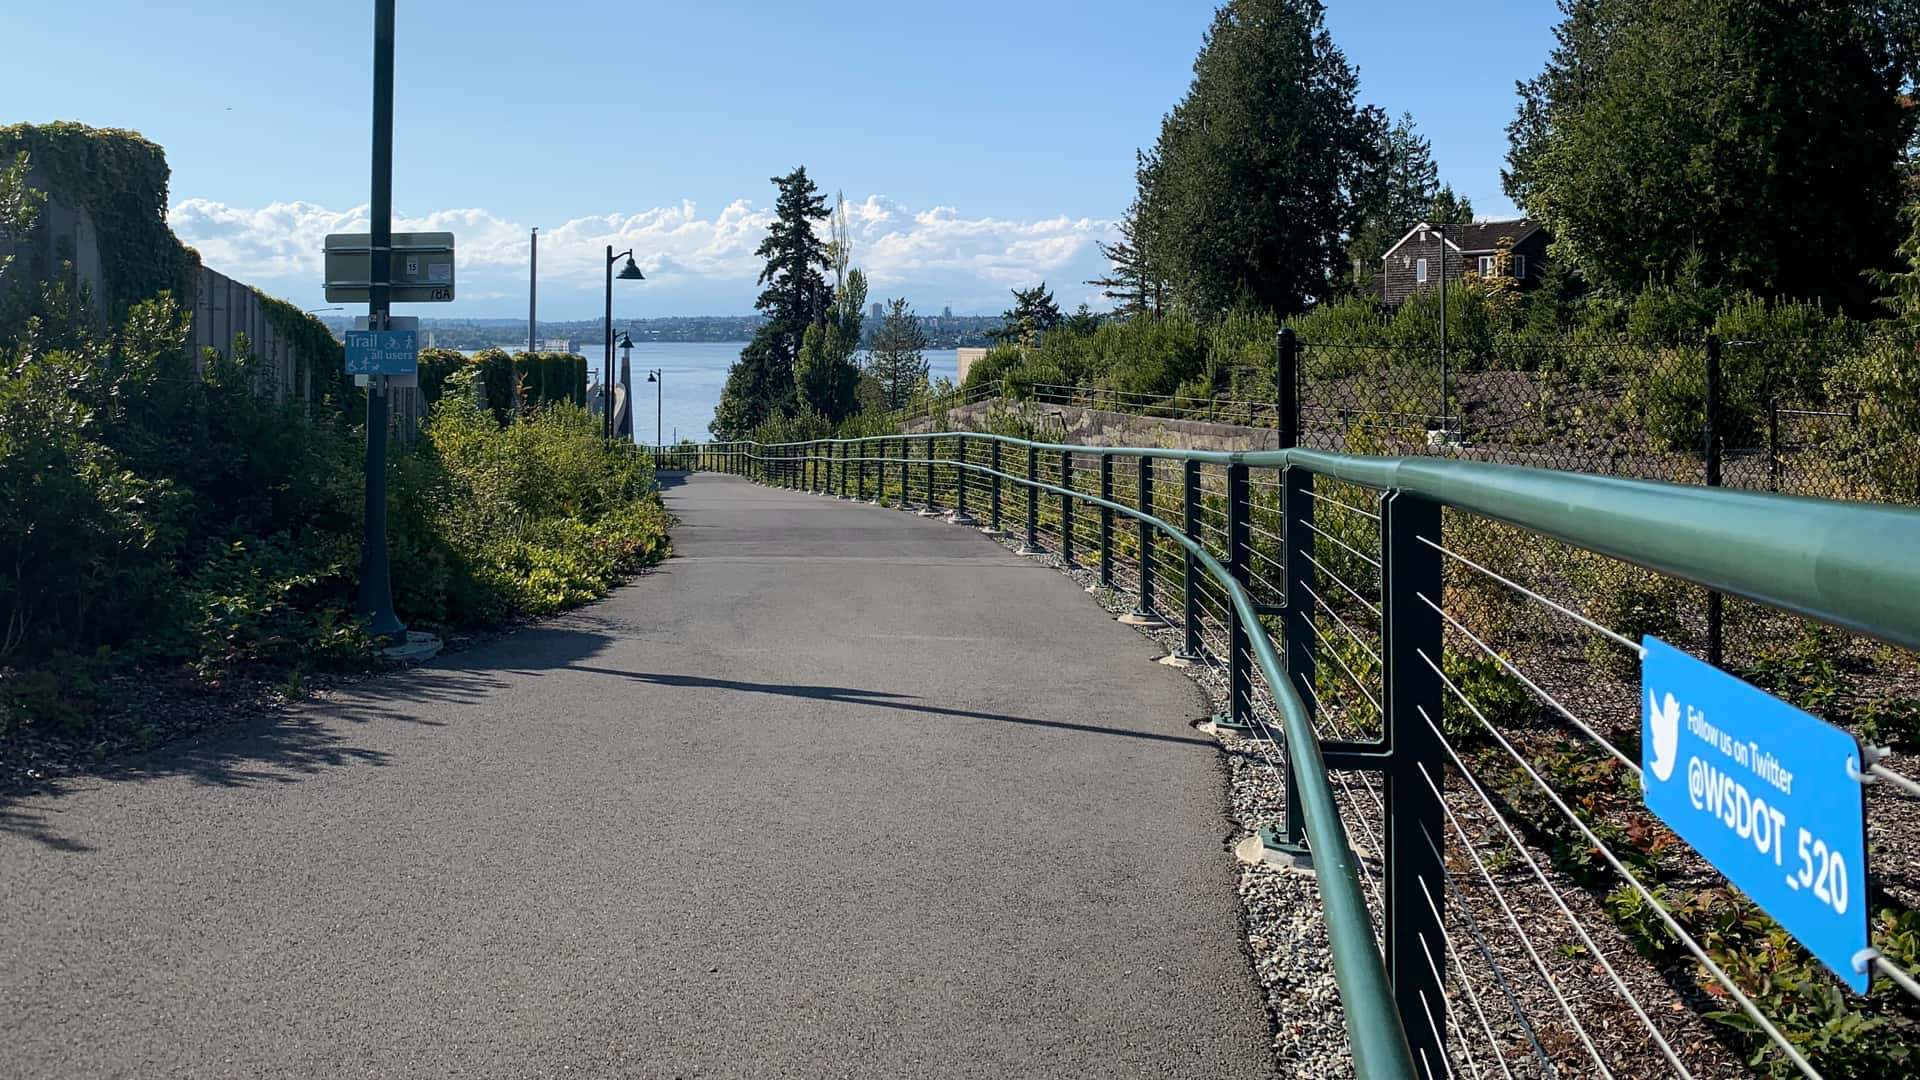 SR 520 trail with signage advertising the Washington State Department of Transportation’s Twitter account